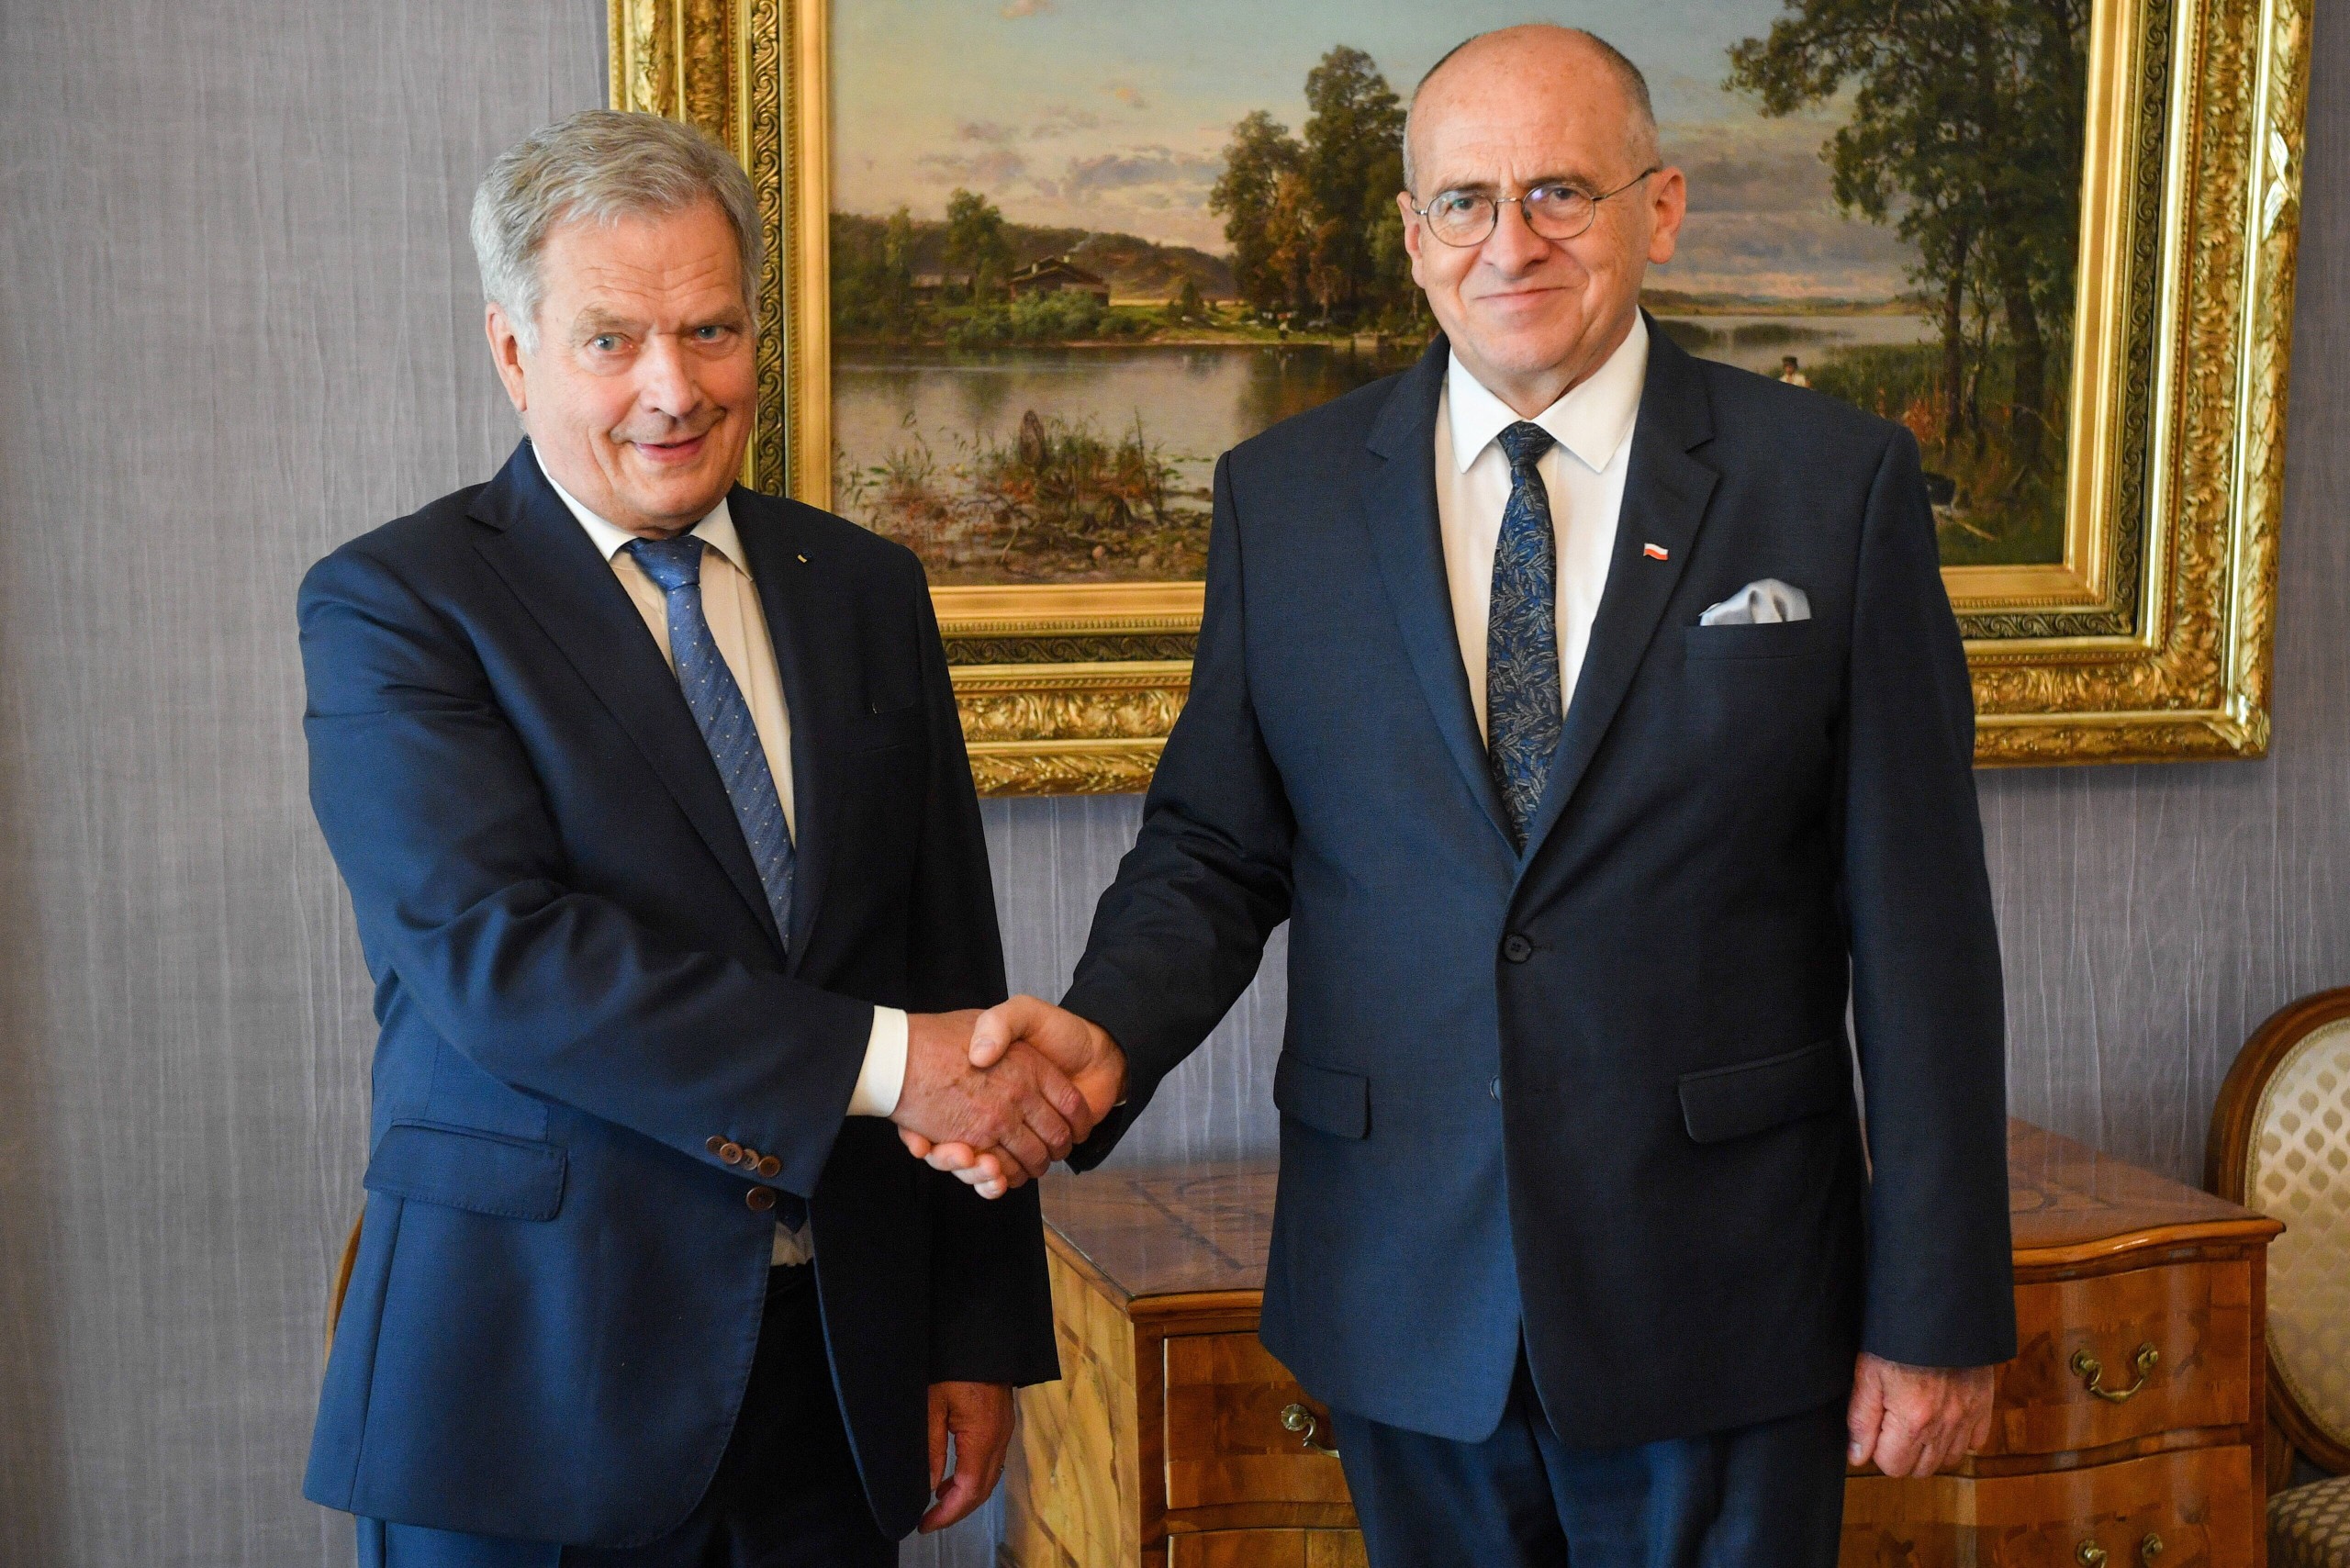 epa10045191 Polish Minister of Foreign Affairs Zbigniew Rau (R) and the President of Finland, Sauli Niinisto (L), shake hands before their meeting in Helsinki, Finland, 01 July 2022. Minister Rau is on a one-day visit to Finland.  EPA/RADEK PIETRUSZKA POLAND OUT